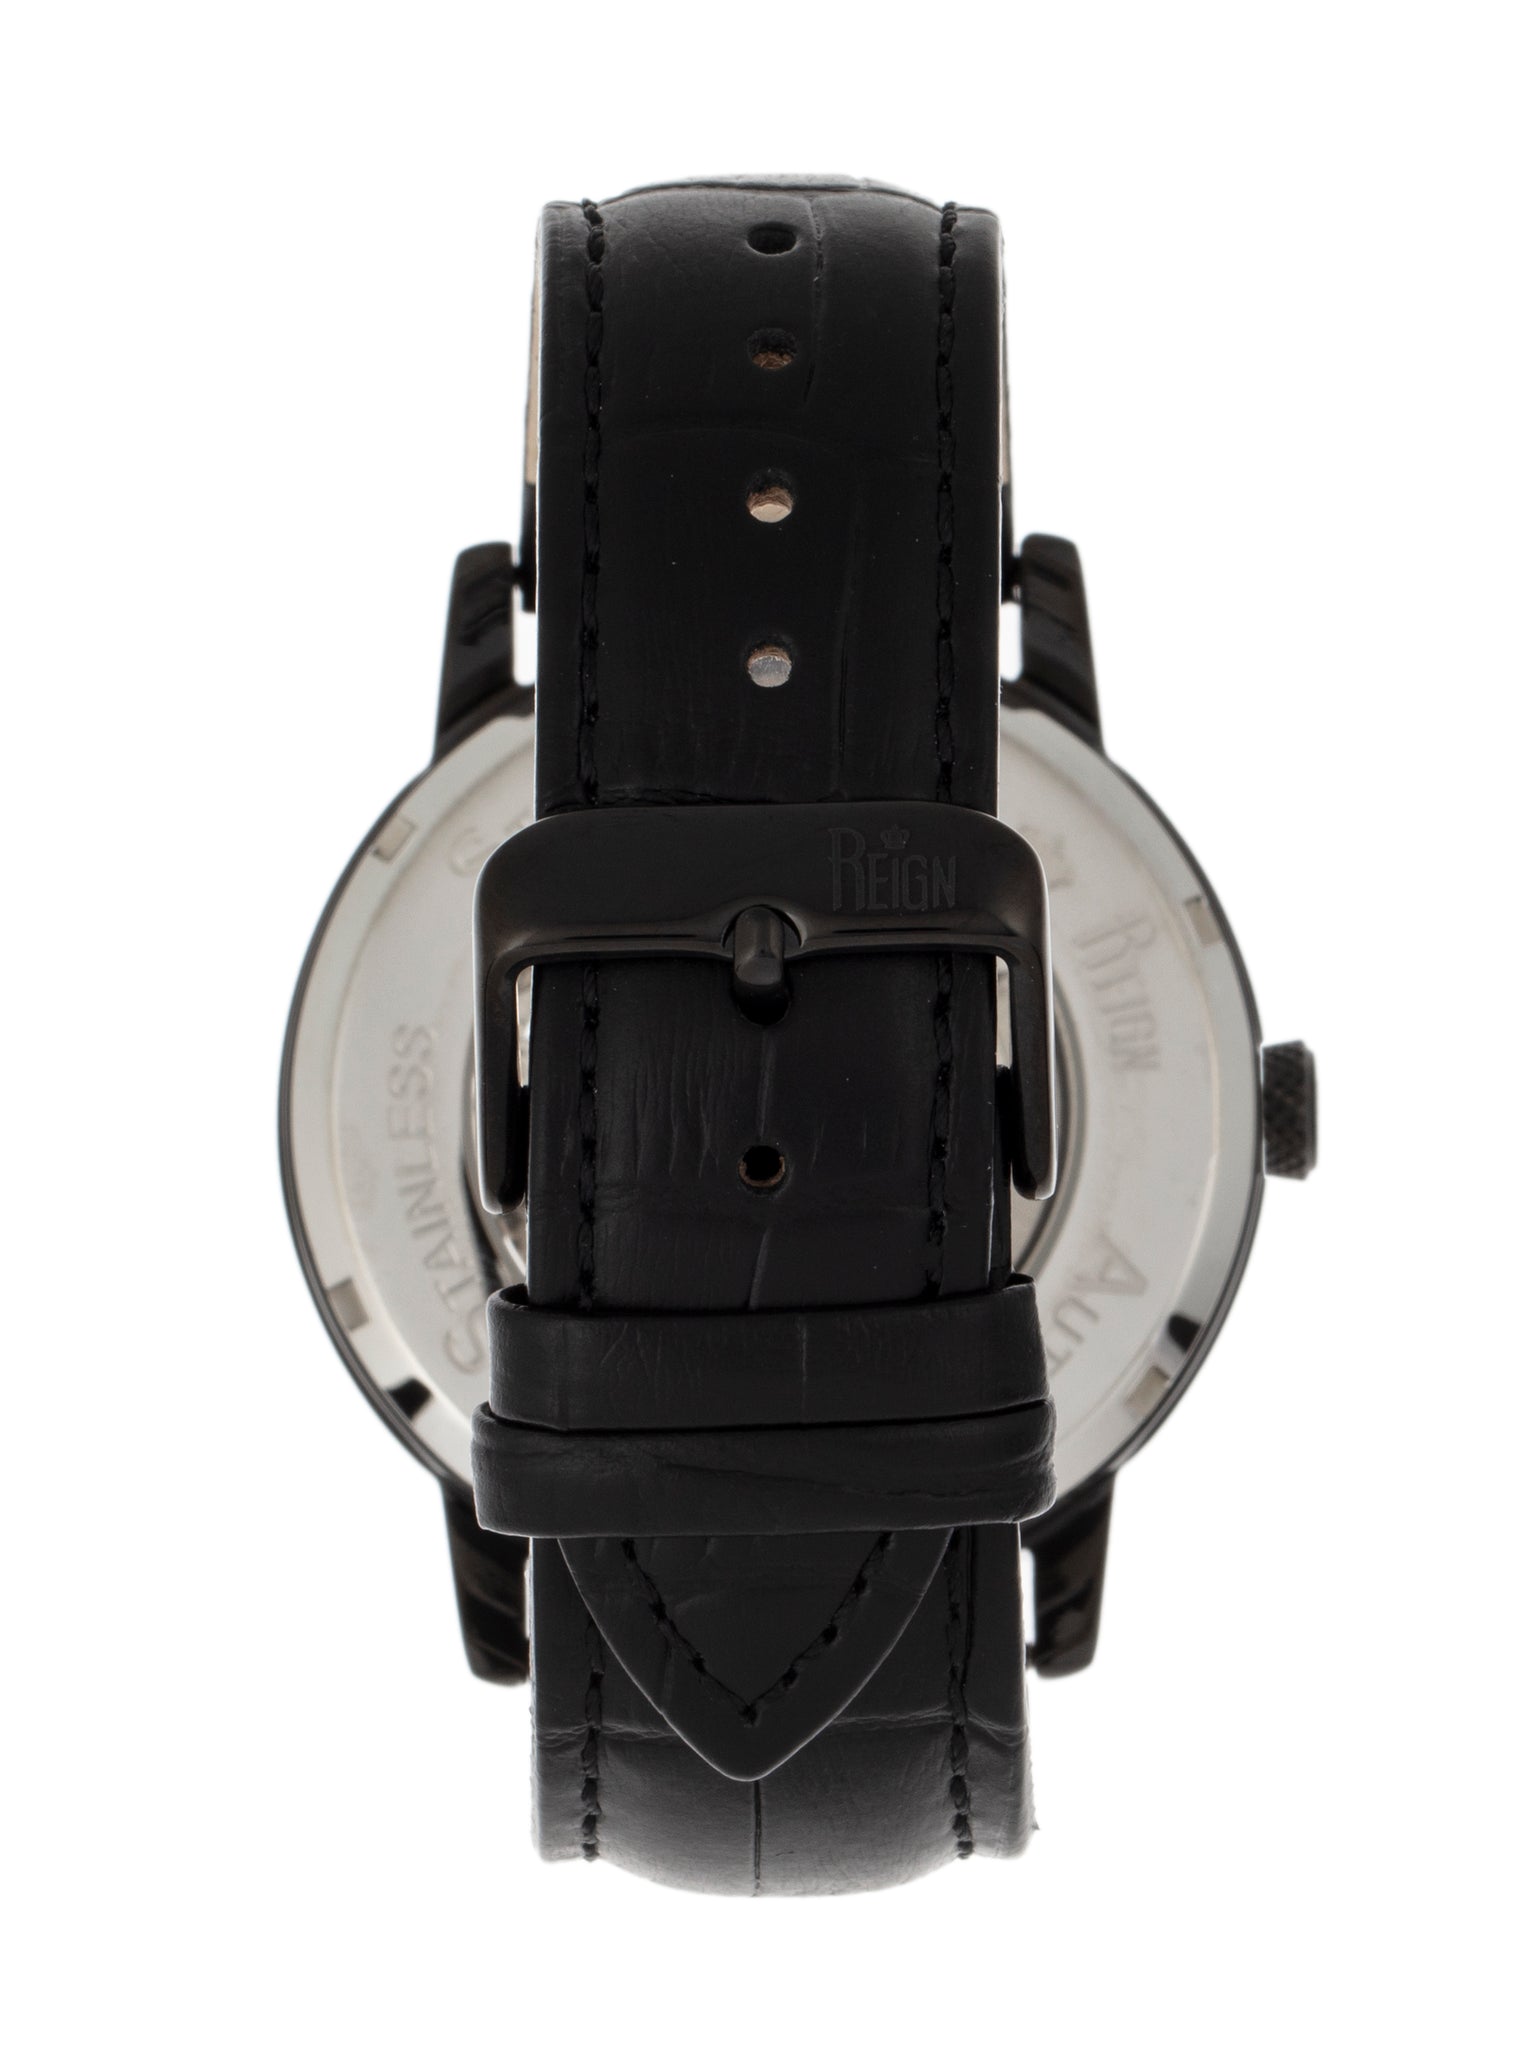 Reign Belfour Automatic Skeleton Leather-Band Watch - Black - REIRN3606